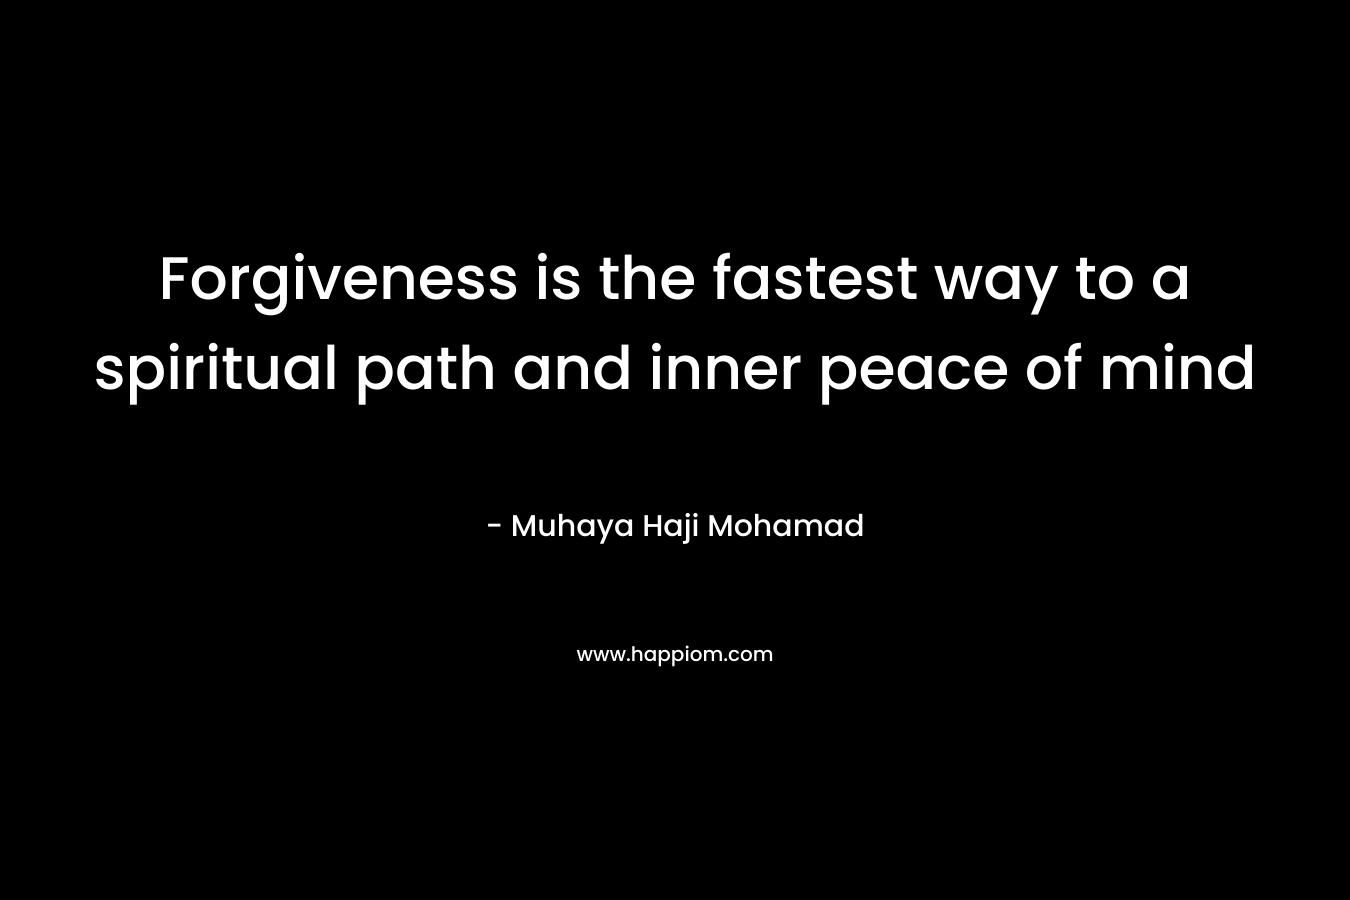 Forgiveness is the fastest way to a spiritual path and inner peace of mind